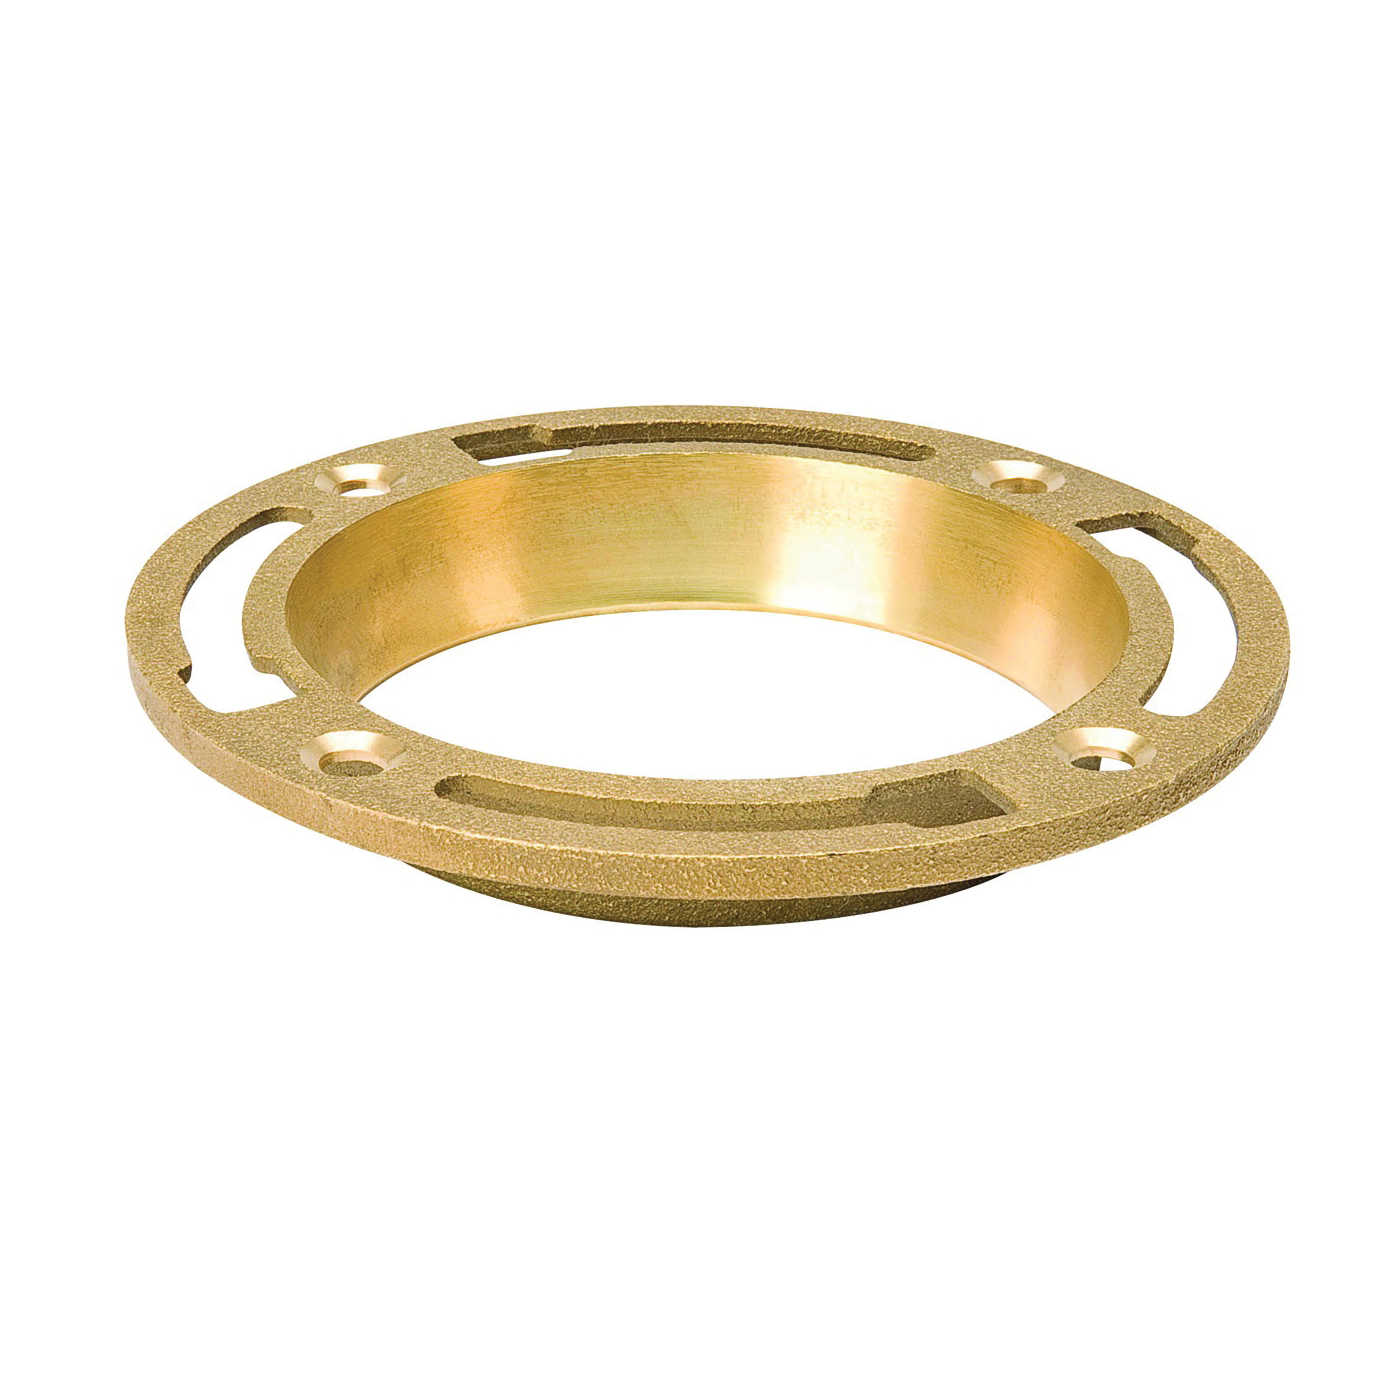 152-001 Closet Floor Flange, Brass, For: Both 3 in and 4 in SCH 40